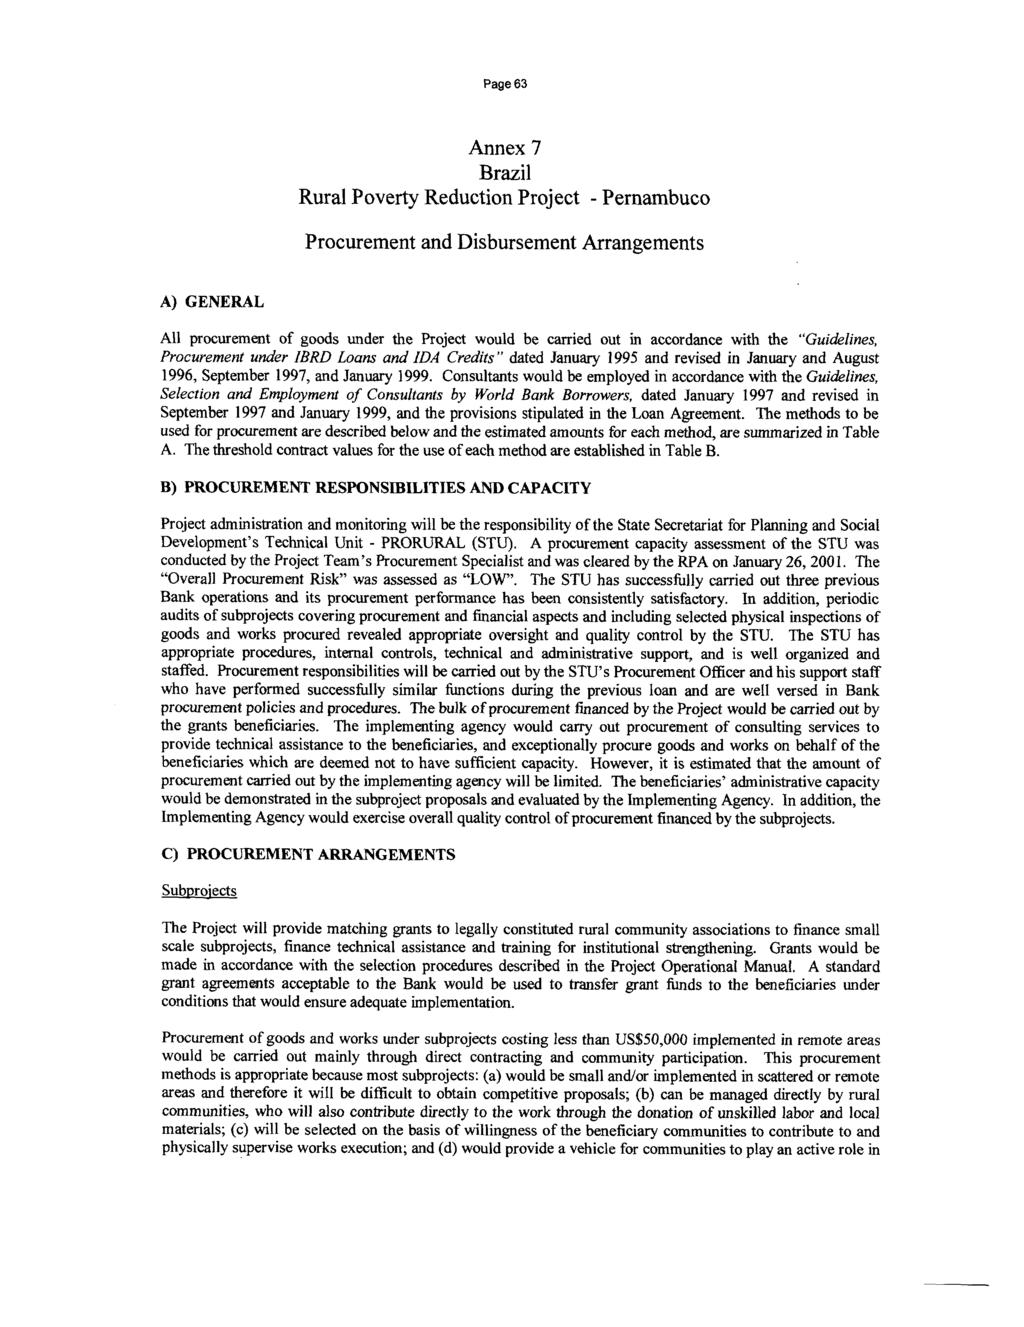 Page 63 Annex 7 Brazil Rural Poverty Reduction Project - Pernambuco Procurement and Disbursement Arrangements A) GENERAL All procurement of goods under the Project would be carried out in accordance